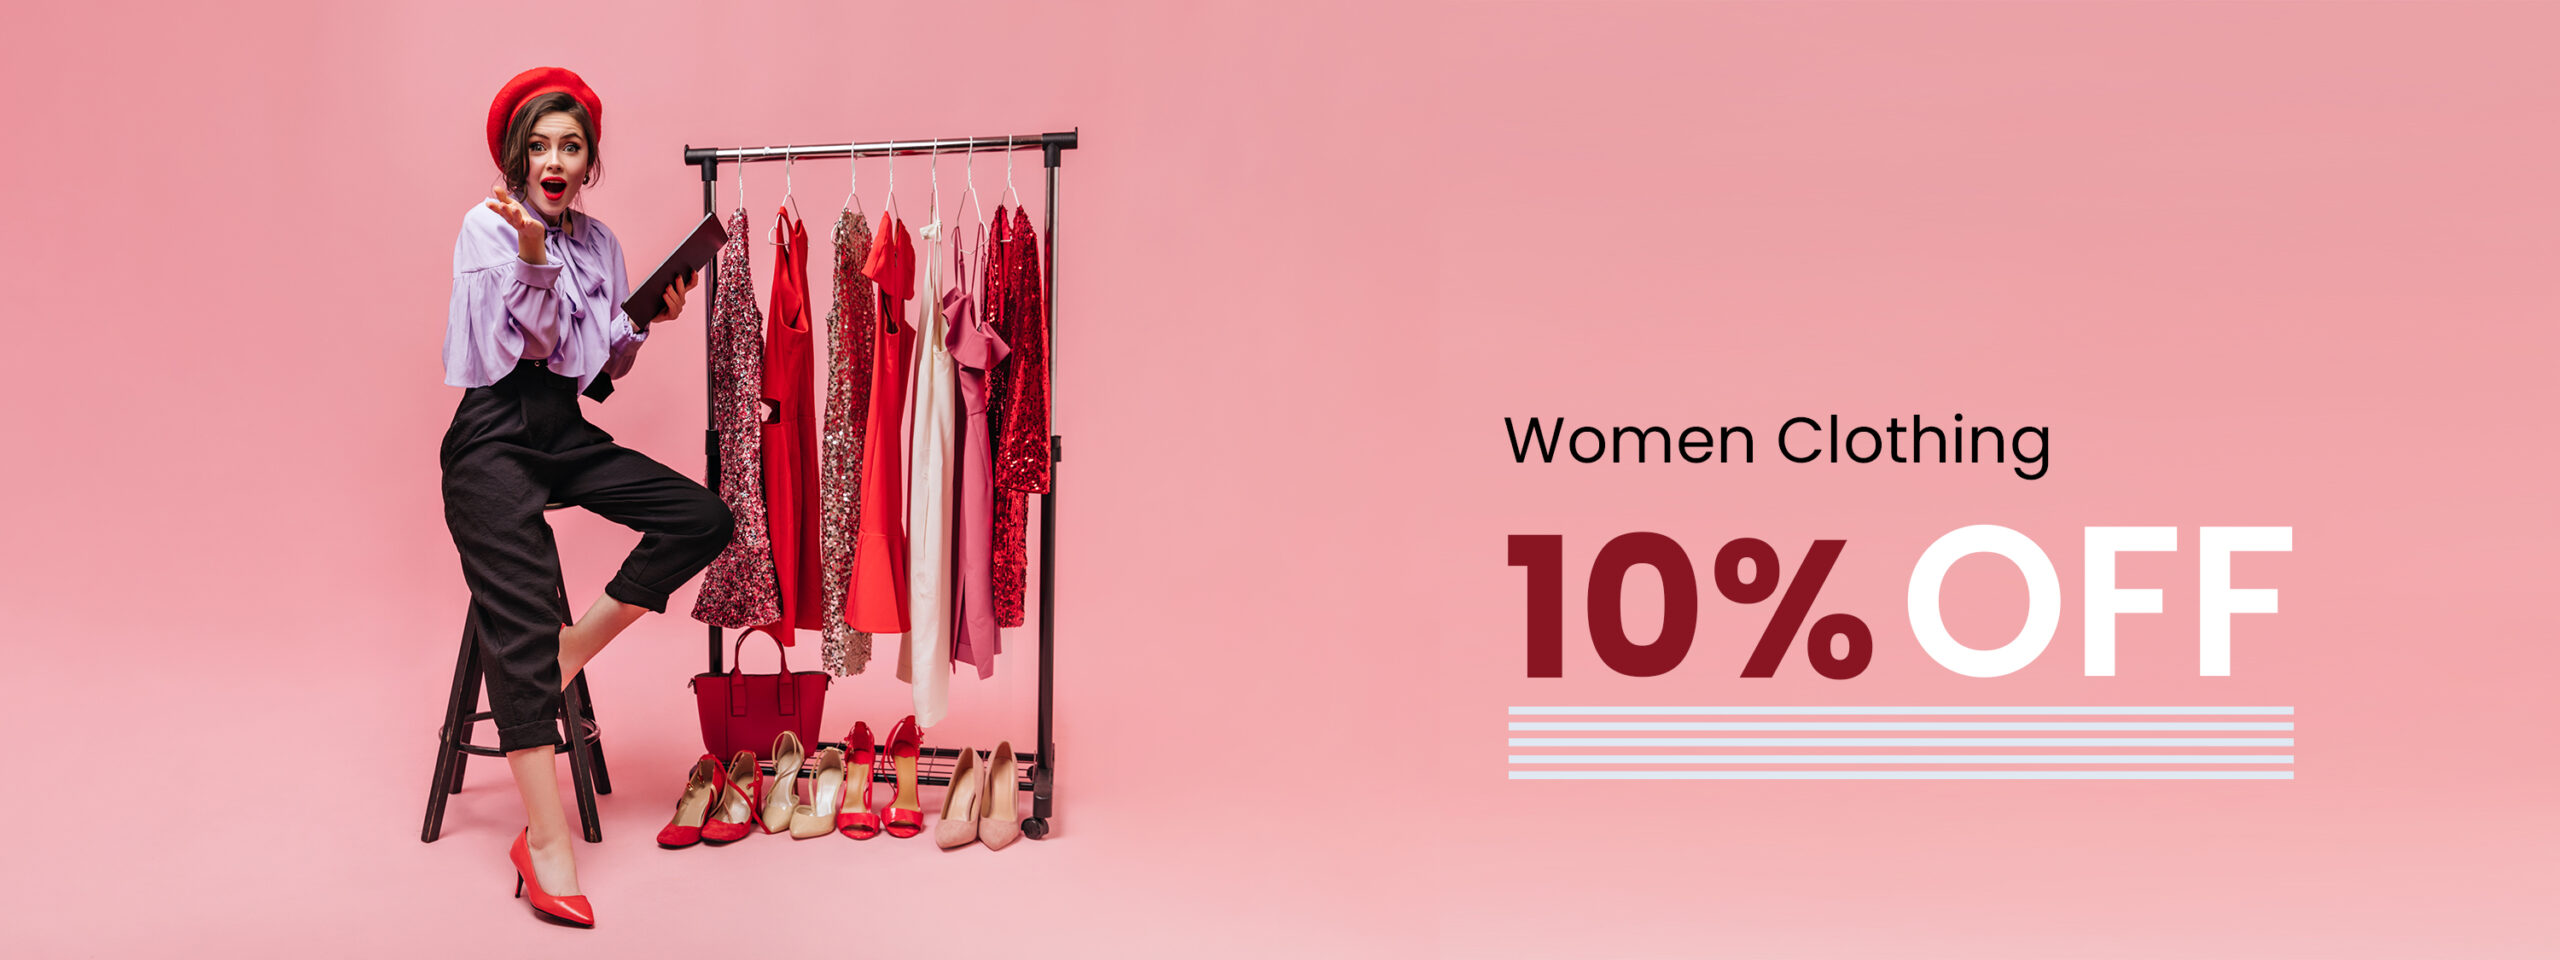 womens clothing offer in bahrain shopping